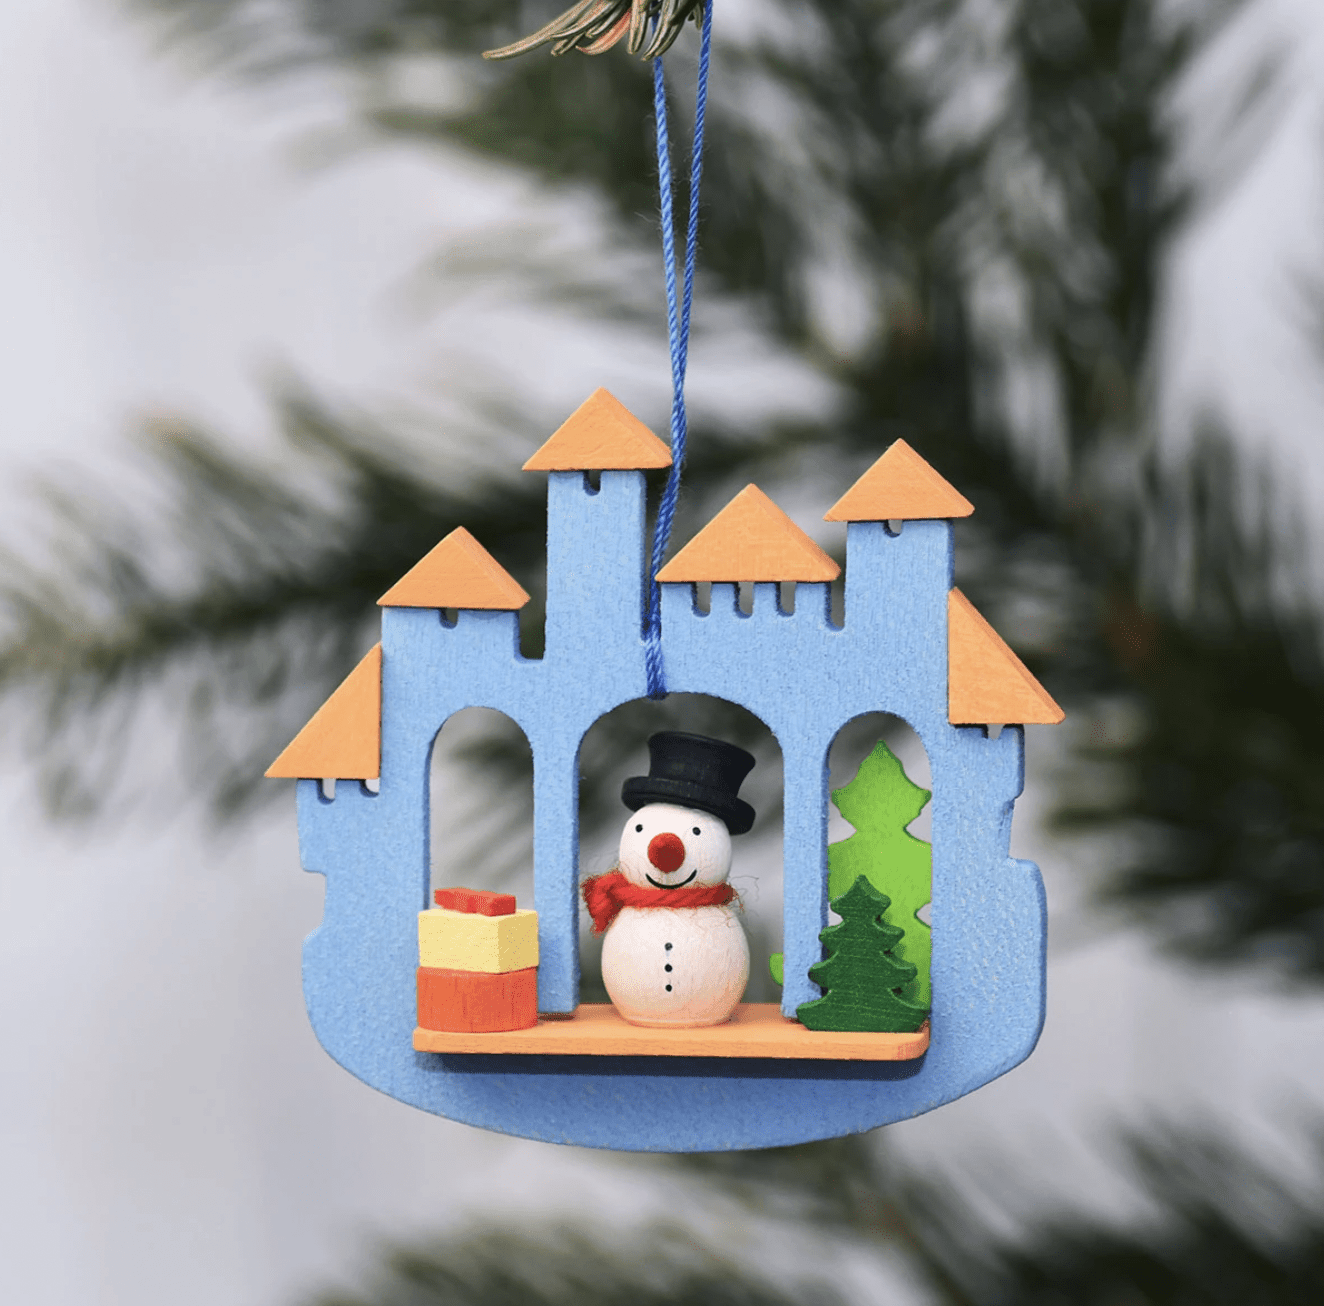 The Curated Parcel - Graupner // Christmas Tree Ornament City Gate 